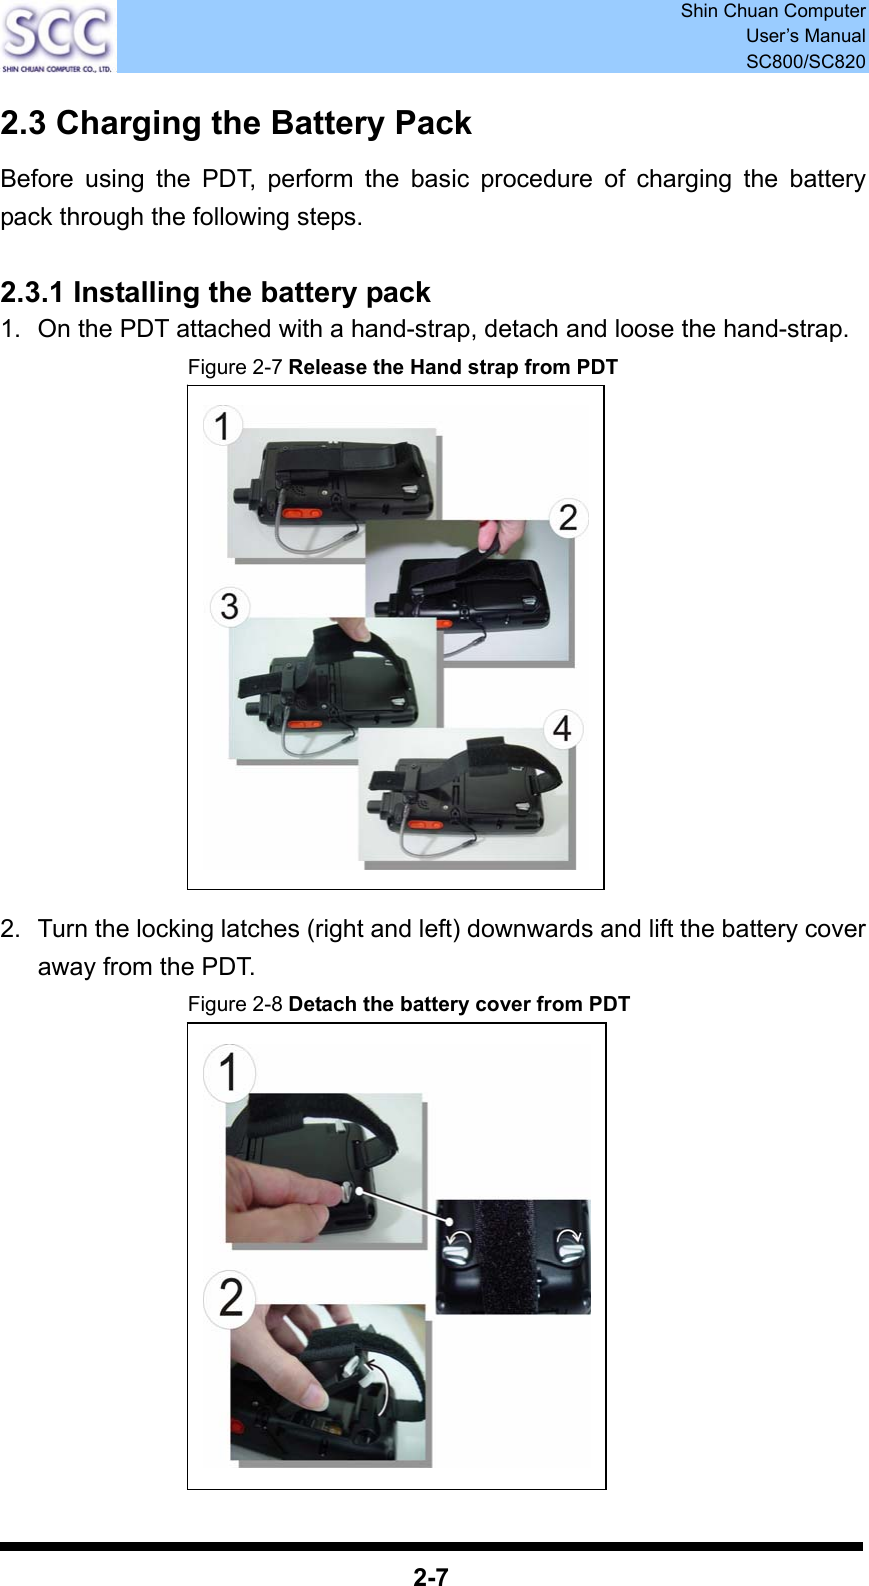  Shin Chuan Computer User’s Manual SC800/SC820  2-7 2.3 Charging the Battery Pack Before using the PDT, perform the basic procedure of charging the battery pack through the following steps.  2.3.1 Installing the battery pack 1.  On the PDT attached with a hand-strap, detach and loose the hand-strap. Figure 2-7 Release the Hand strap from PDT               2.  Turn the locking latches (right and left) downwards and lift the battery cover away from the PDT. Figure 2-8 Detach the battery cover from PDT              